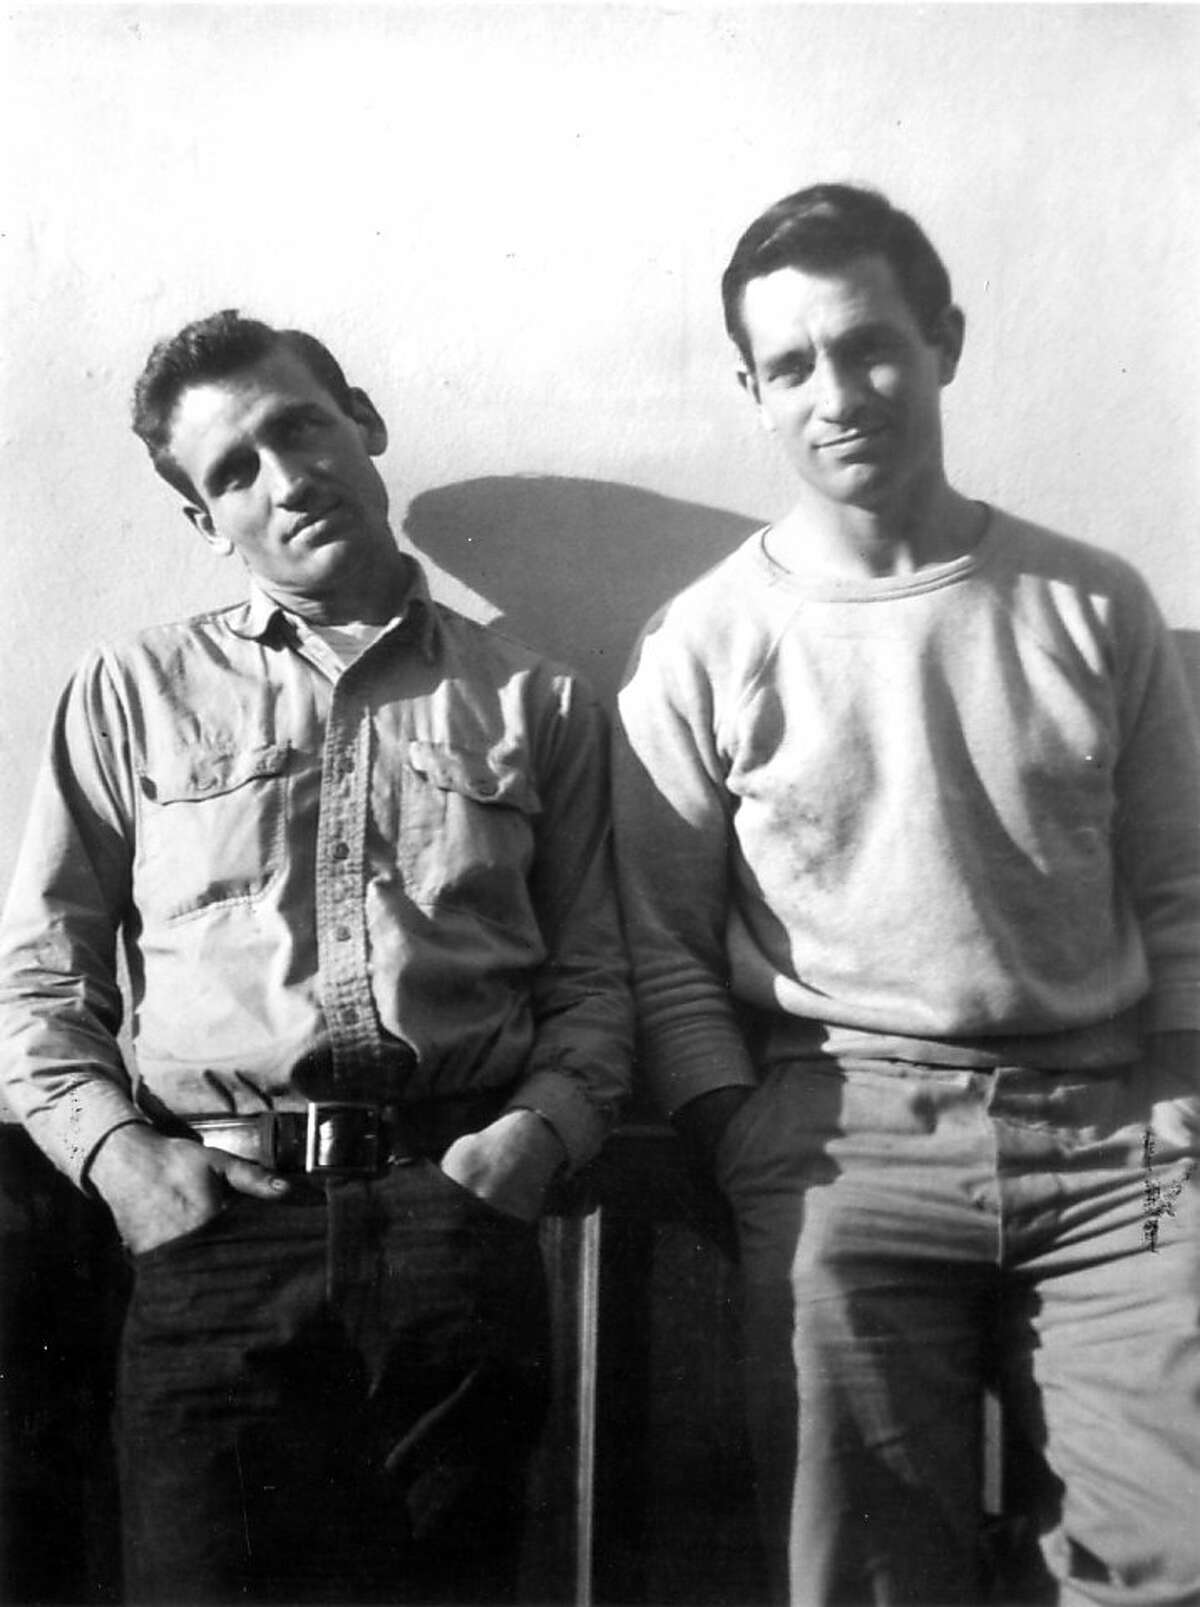 Neal Cassdy, left, and Jack Kerouac in 1949.